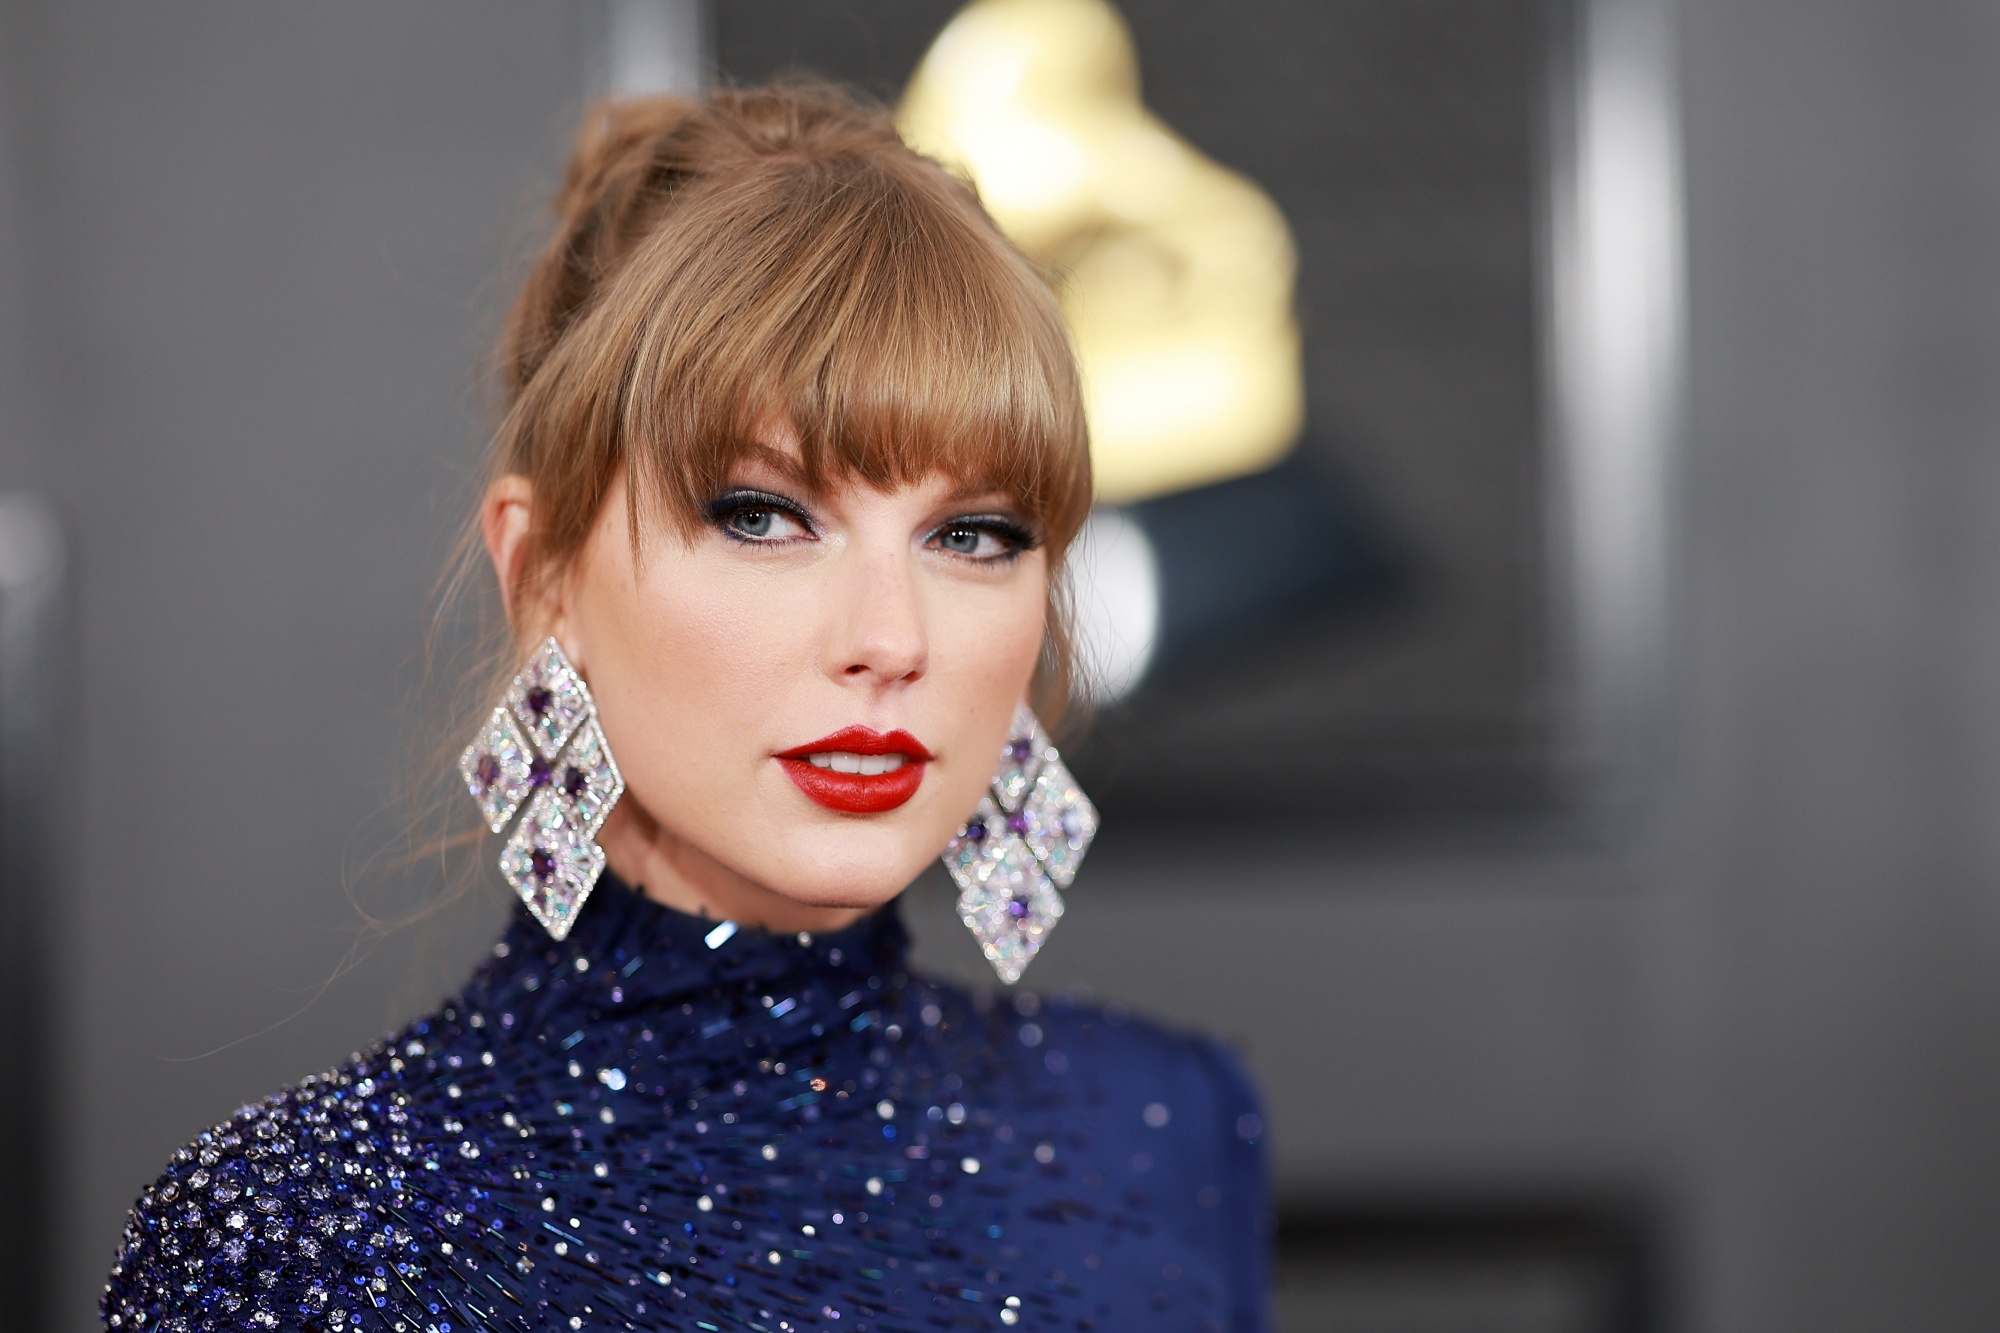 Taylor Swift wants to make a TV show based on her own life